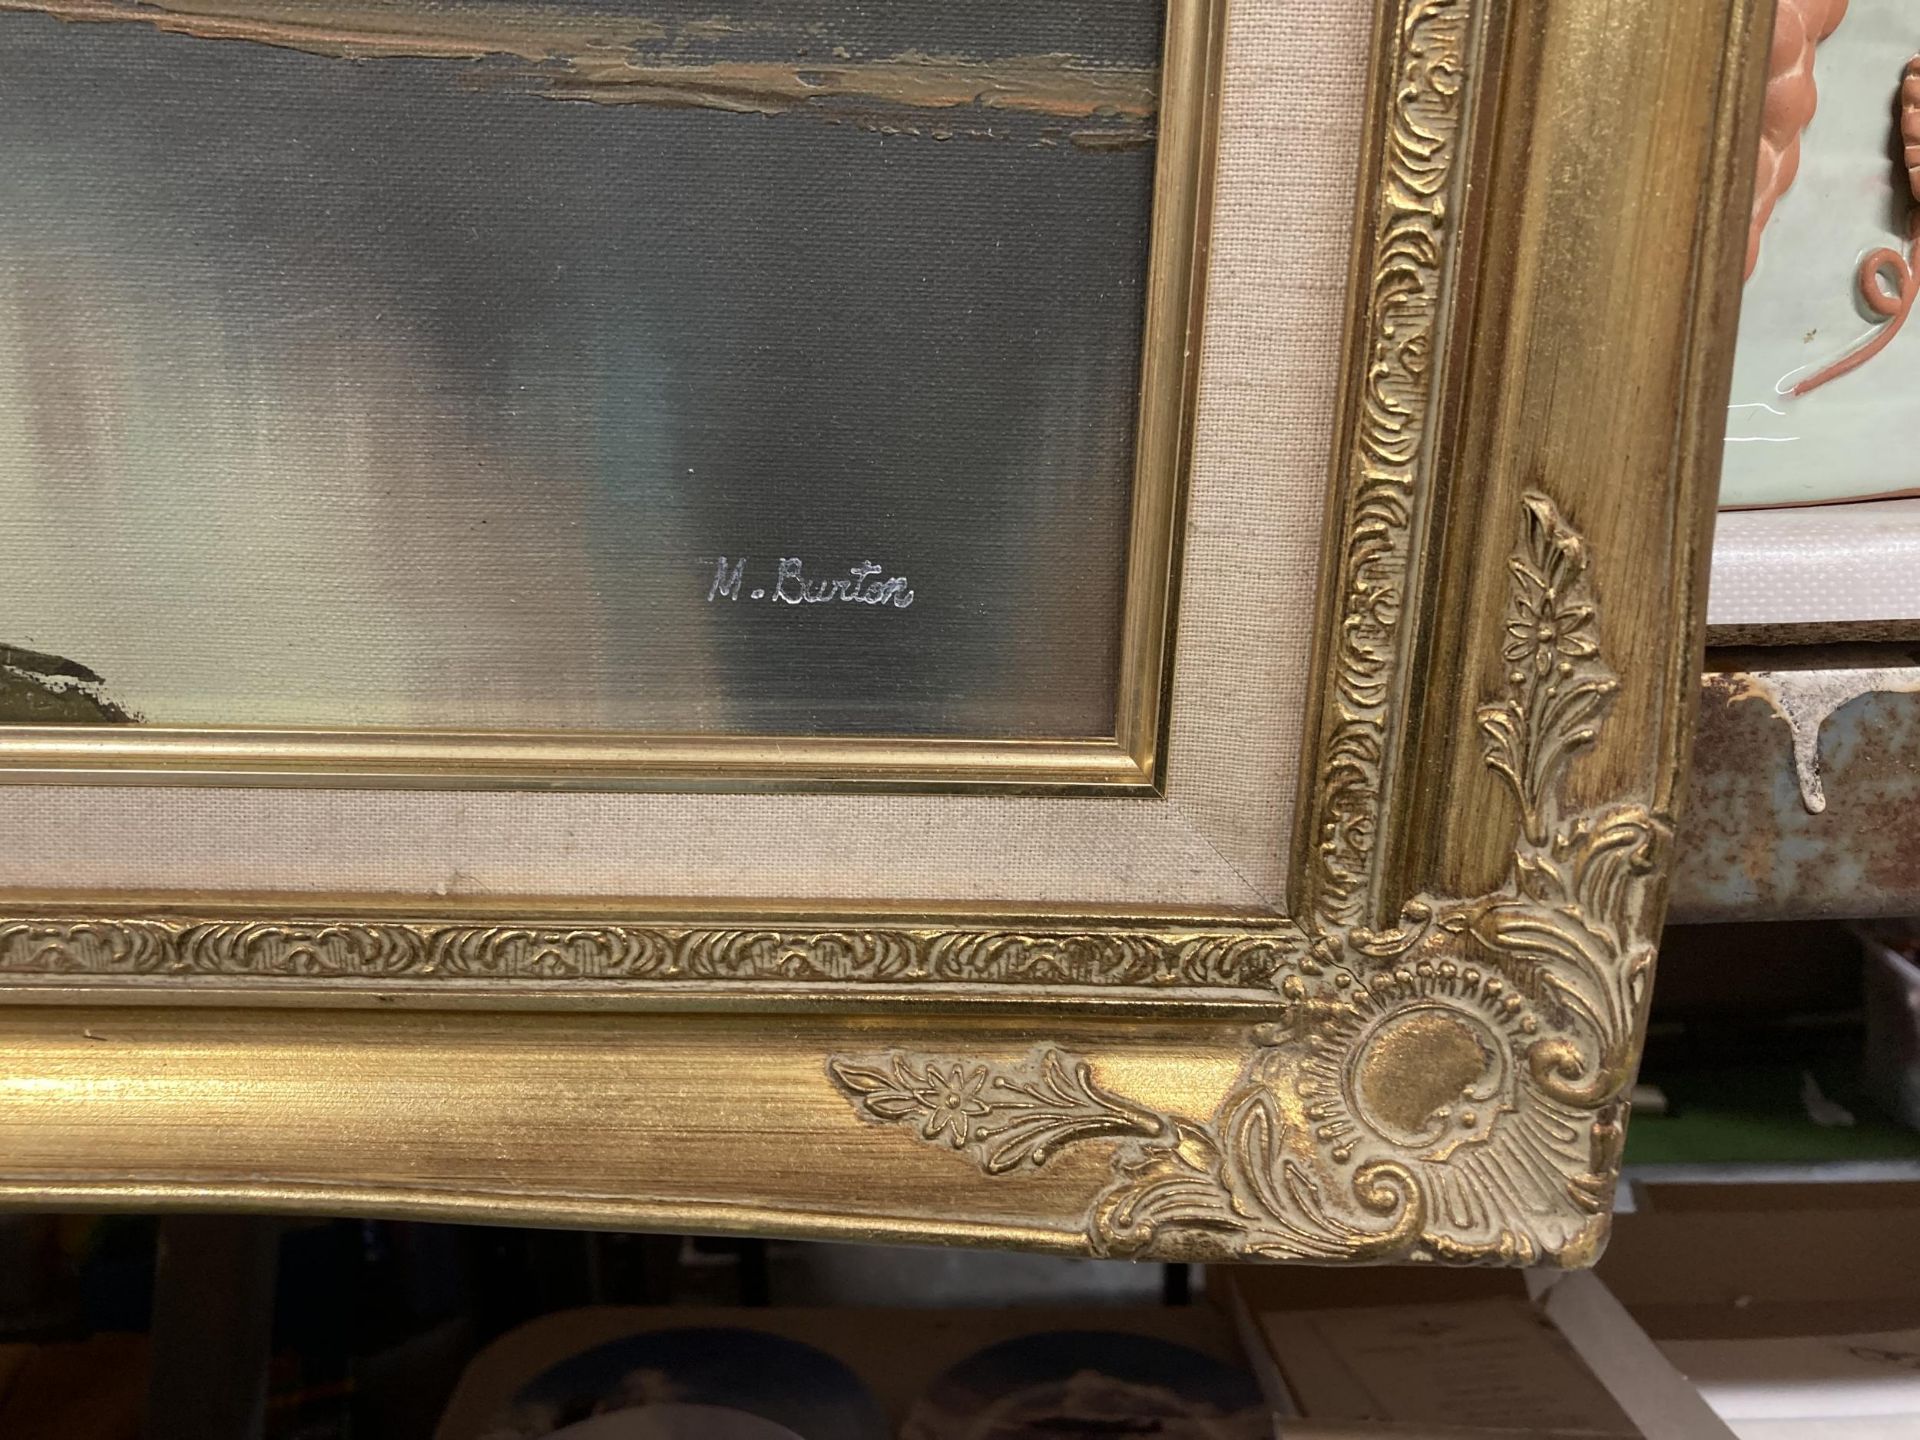 AN OIL ON CANVAS BY M. BURTON IN AN ORNATE GOLD FRAME - Image 2 of 2